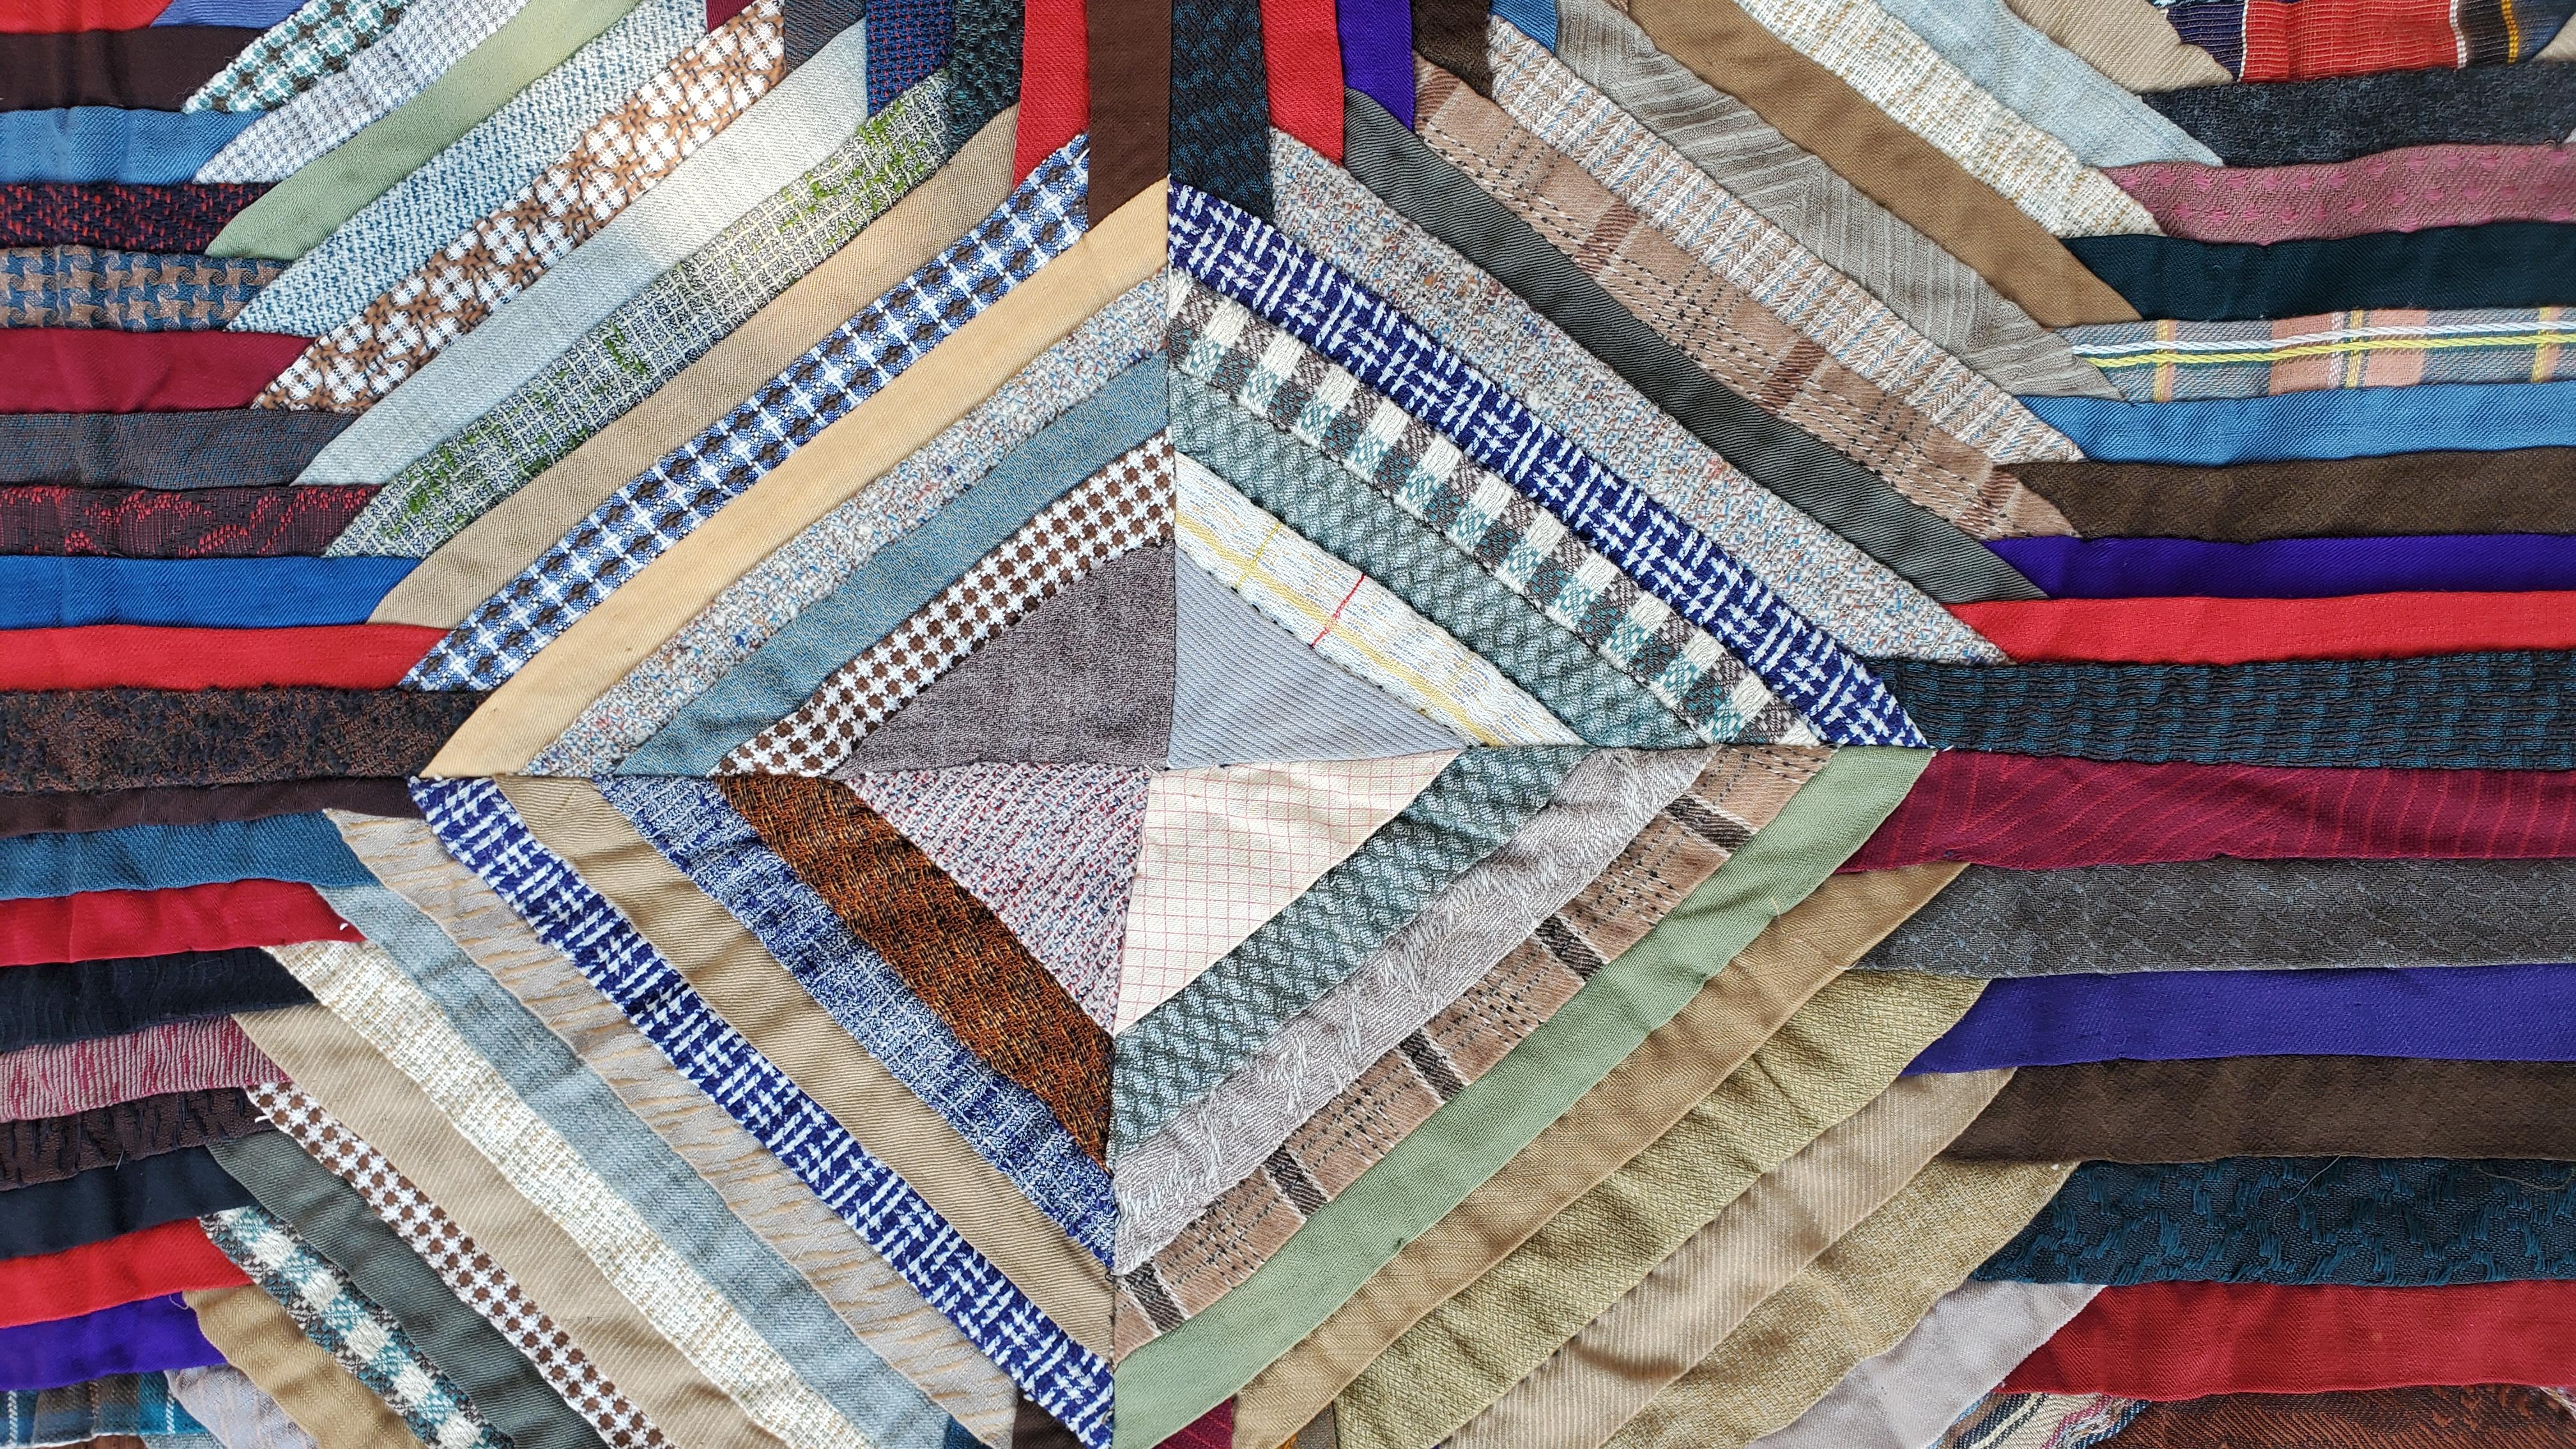 This 19thc wool wind mill blades / log cabin quilt was found in Pennsylvania The quilt is in very good condition. The backing is very good as well. Very unusual with the striped border.